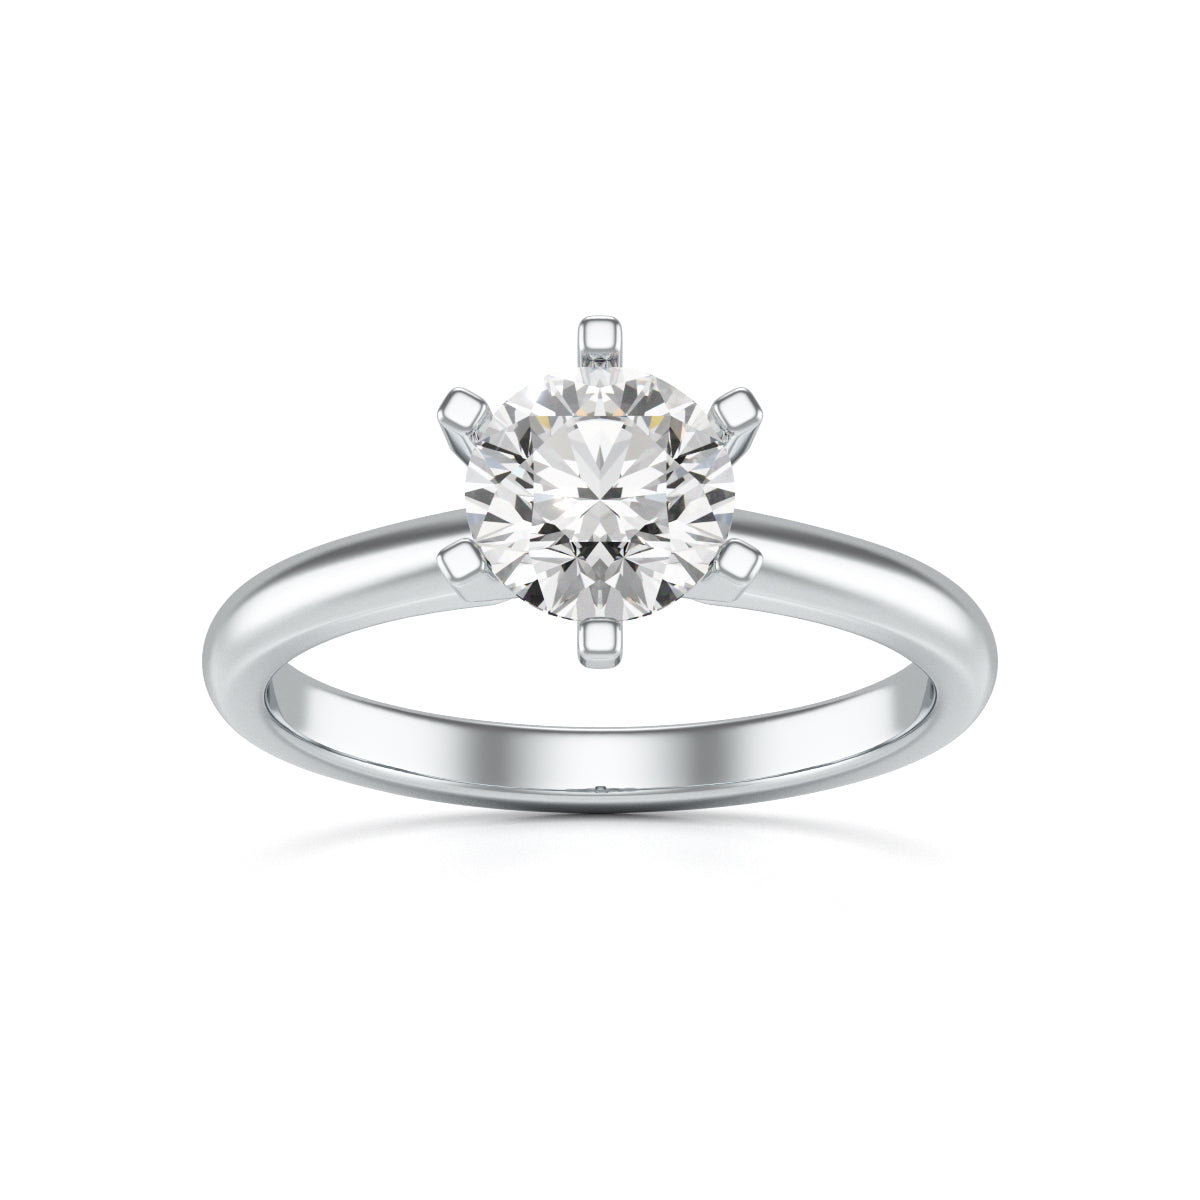 Round Brilliant Cut Centre Stone, Six Claw, Tapered Shank, Diamond Engagement Ring